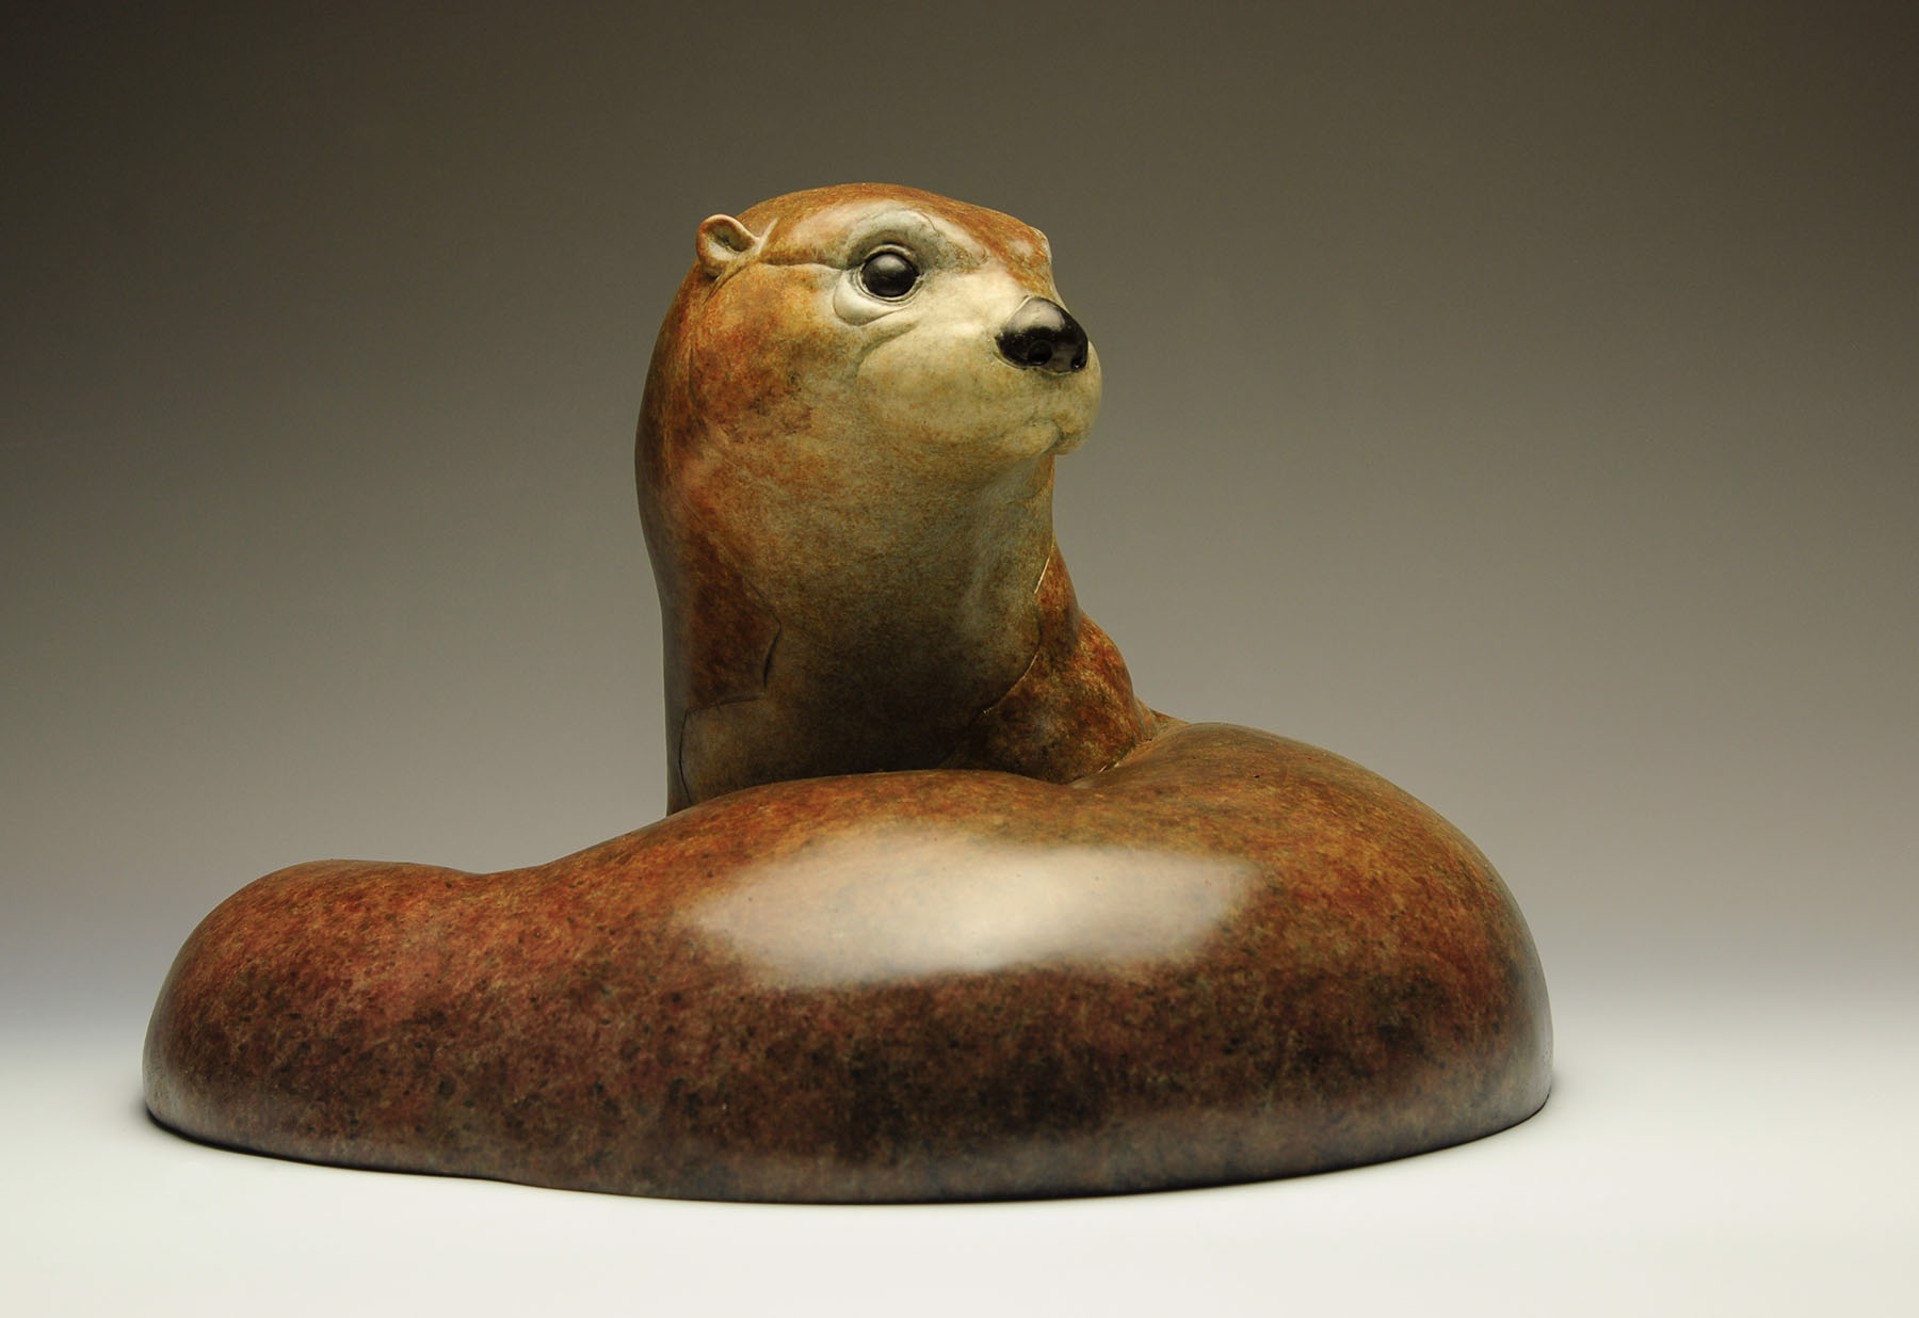 A Bronze Sculpture Of An Otter Curled Up In A Circle Featuring A Contemporary Patina And Smooth Surface, By Jeremy Bradshaw, Available At Gallery Wild